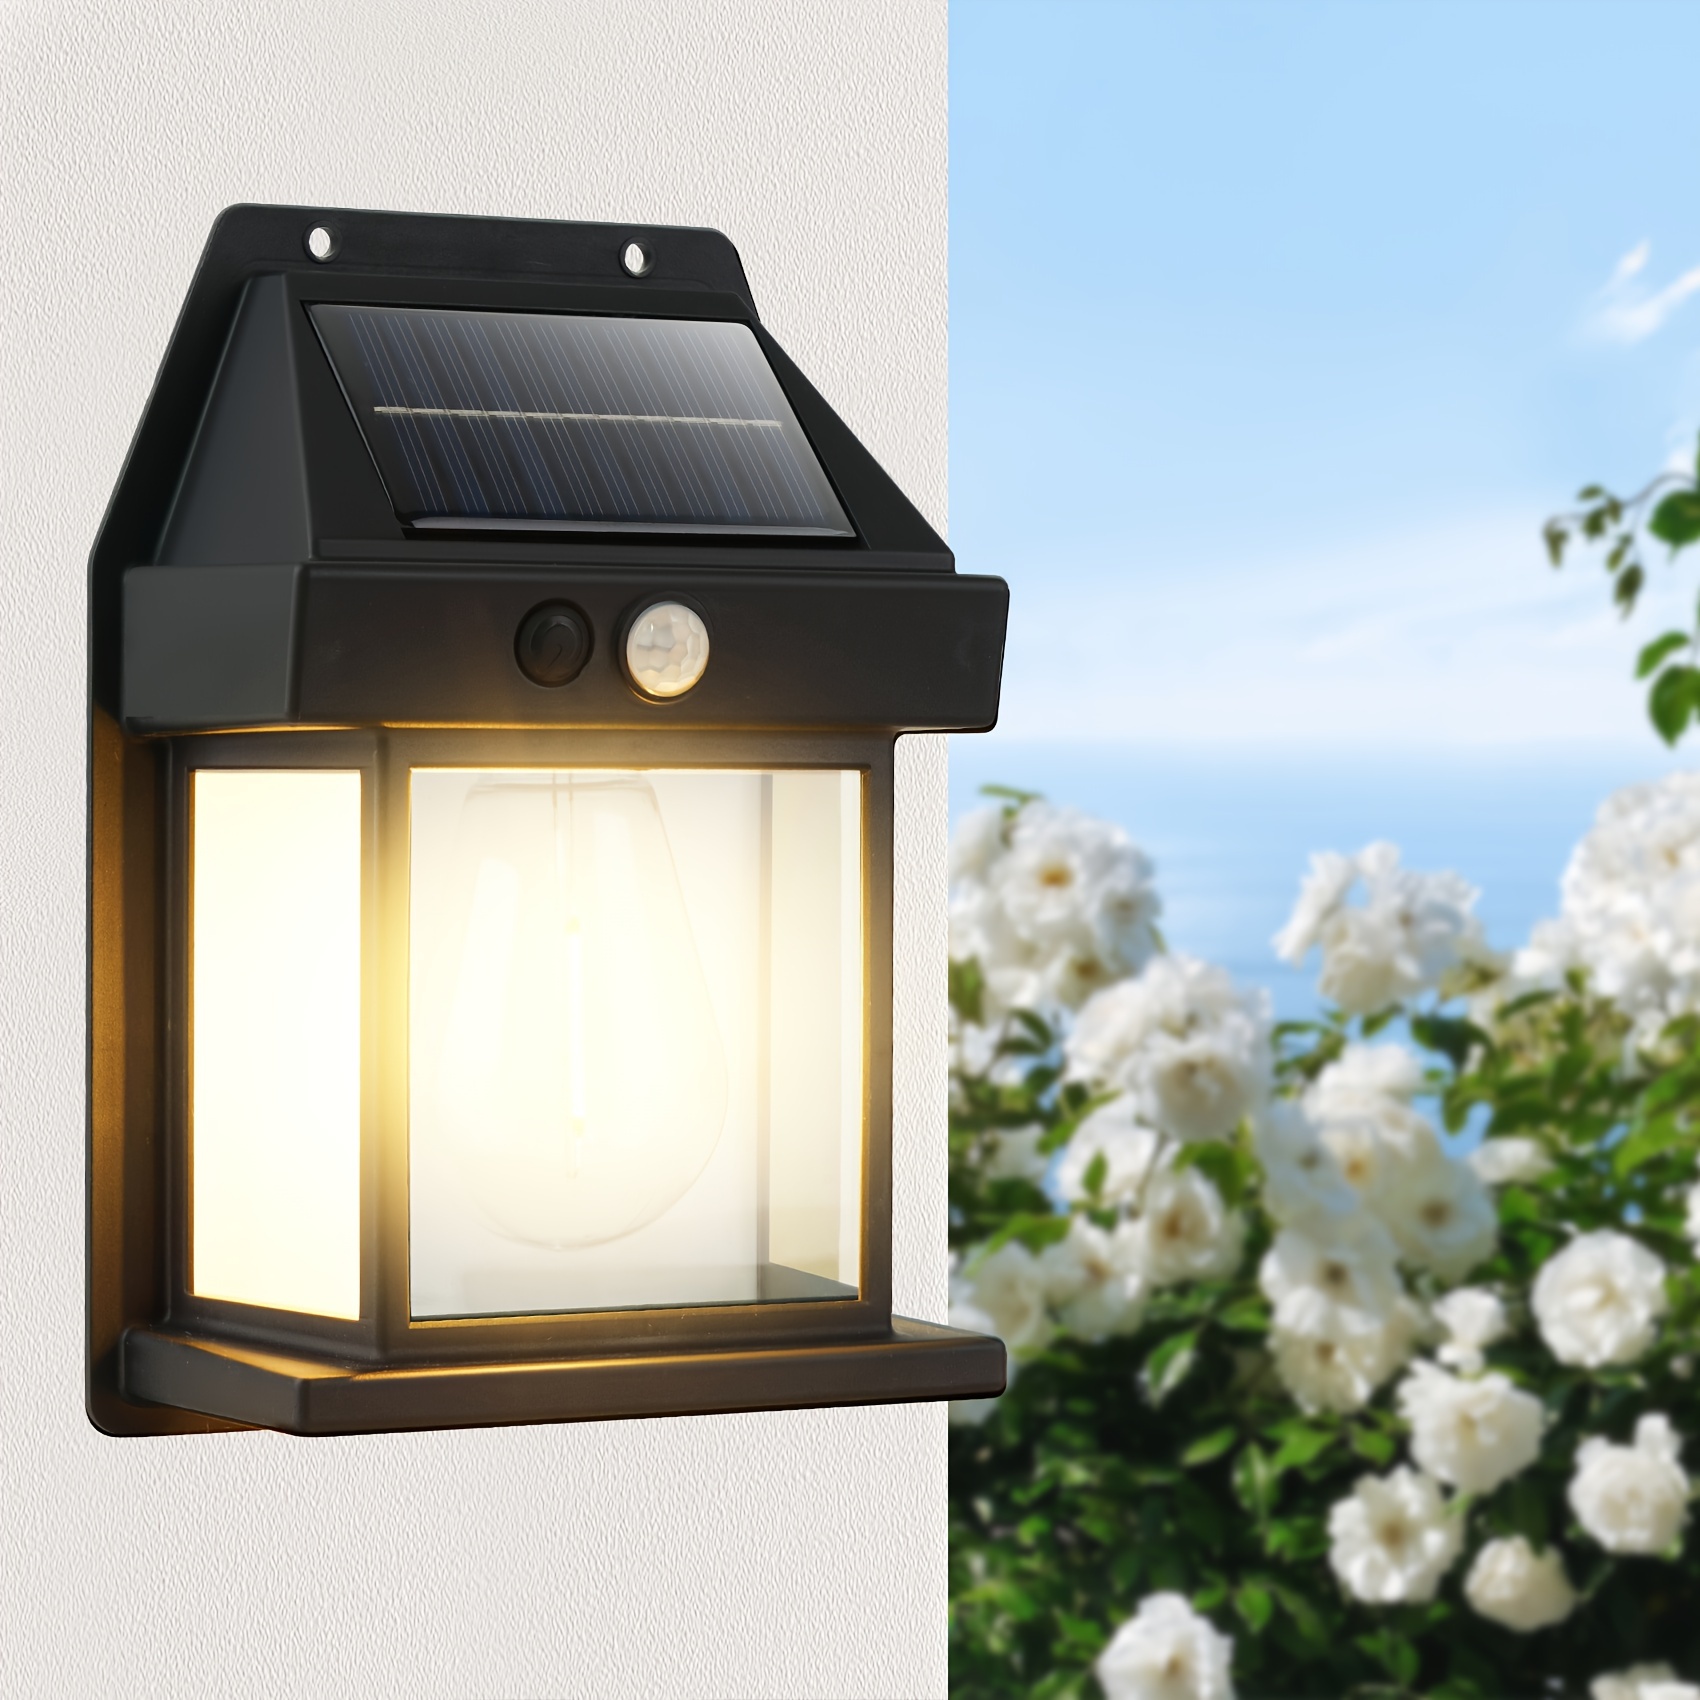 

Solar Lights Outdoor, Dusk To Dawn Solar Wall Sconce Motion Sensor, 3 Lighting Modes Waterproof Solar Security Wall Lantern Light Fixtures For Garden Yard Patio Fence Outside Decorative